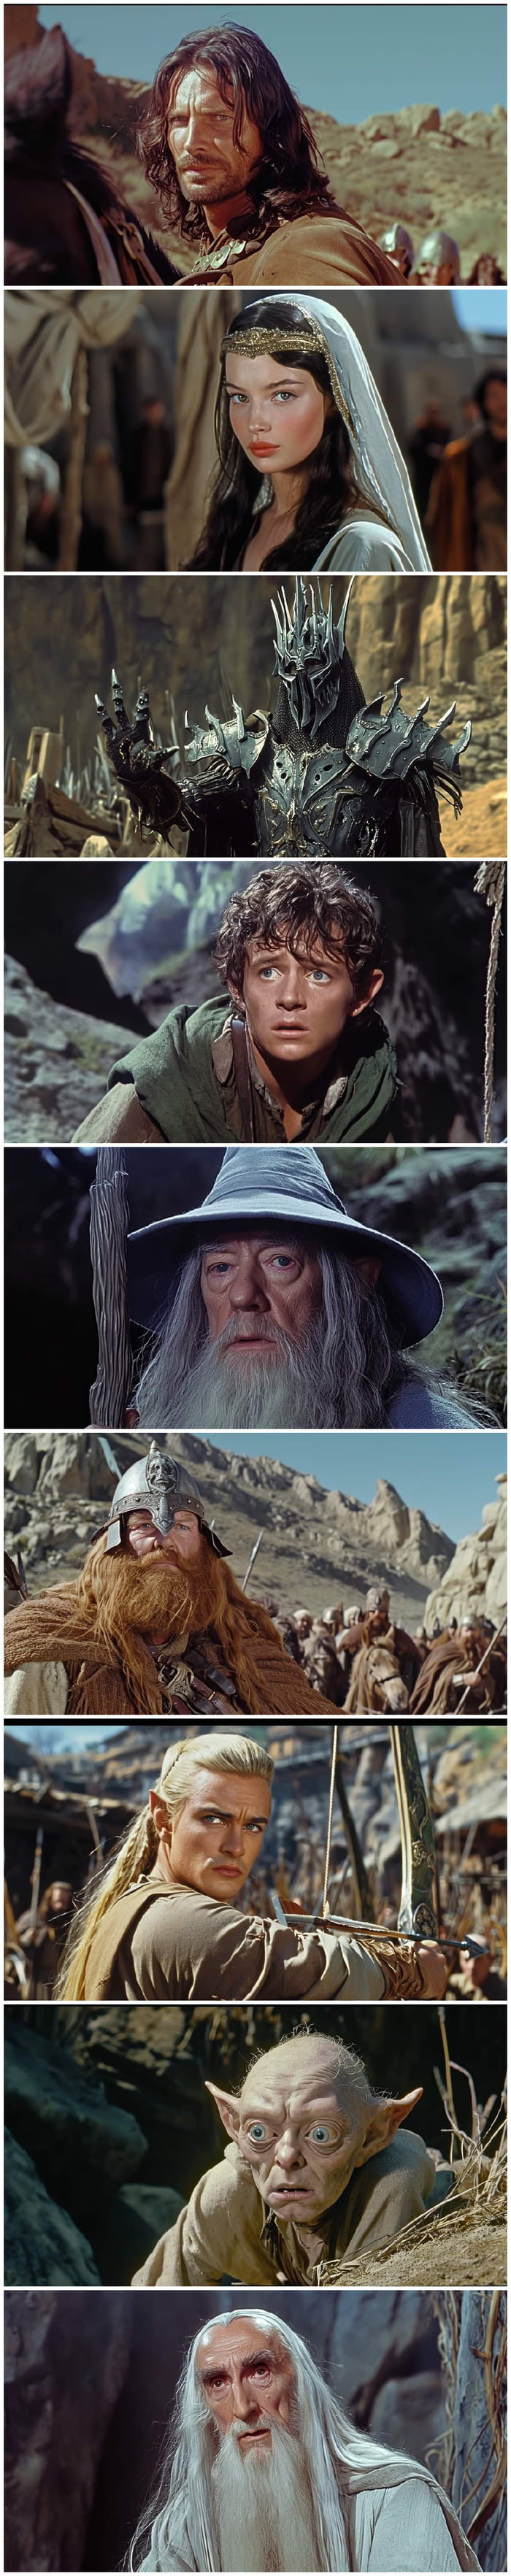 The 1950's The Lord of the Rings Image